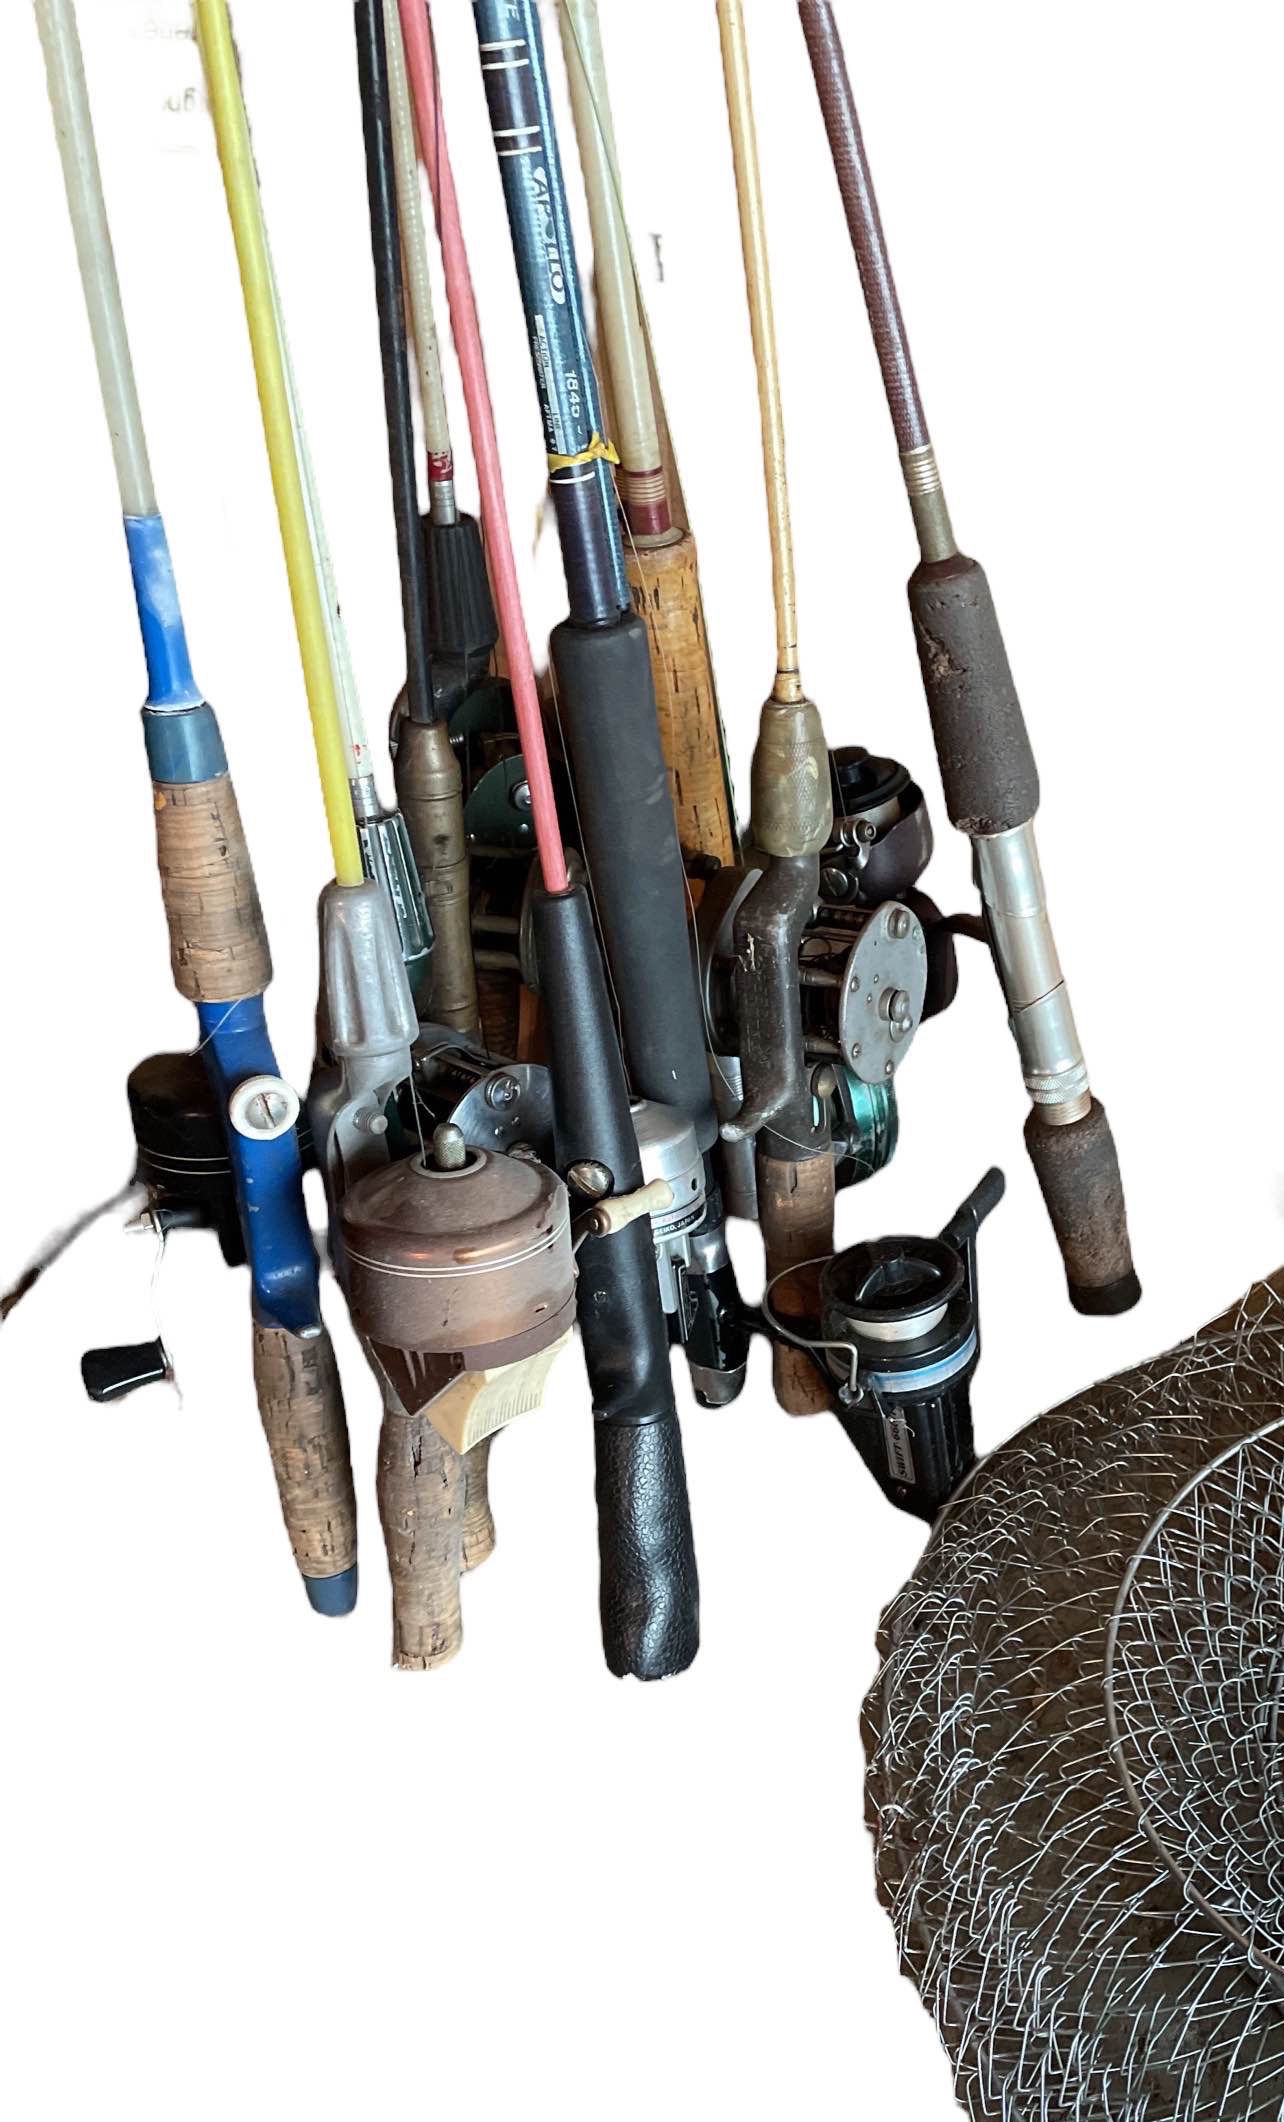 Sound Auction Service - Auction: 11/17/20 Hawkins, Nichols & Others  Consignment Auction ITEM: 4 Vintage Fishing Rods w/2 Reels